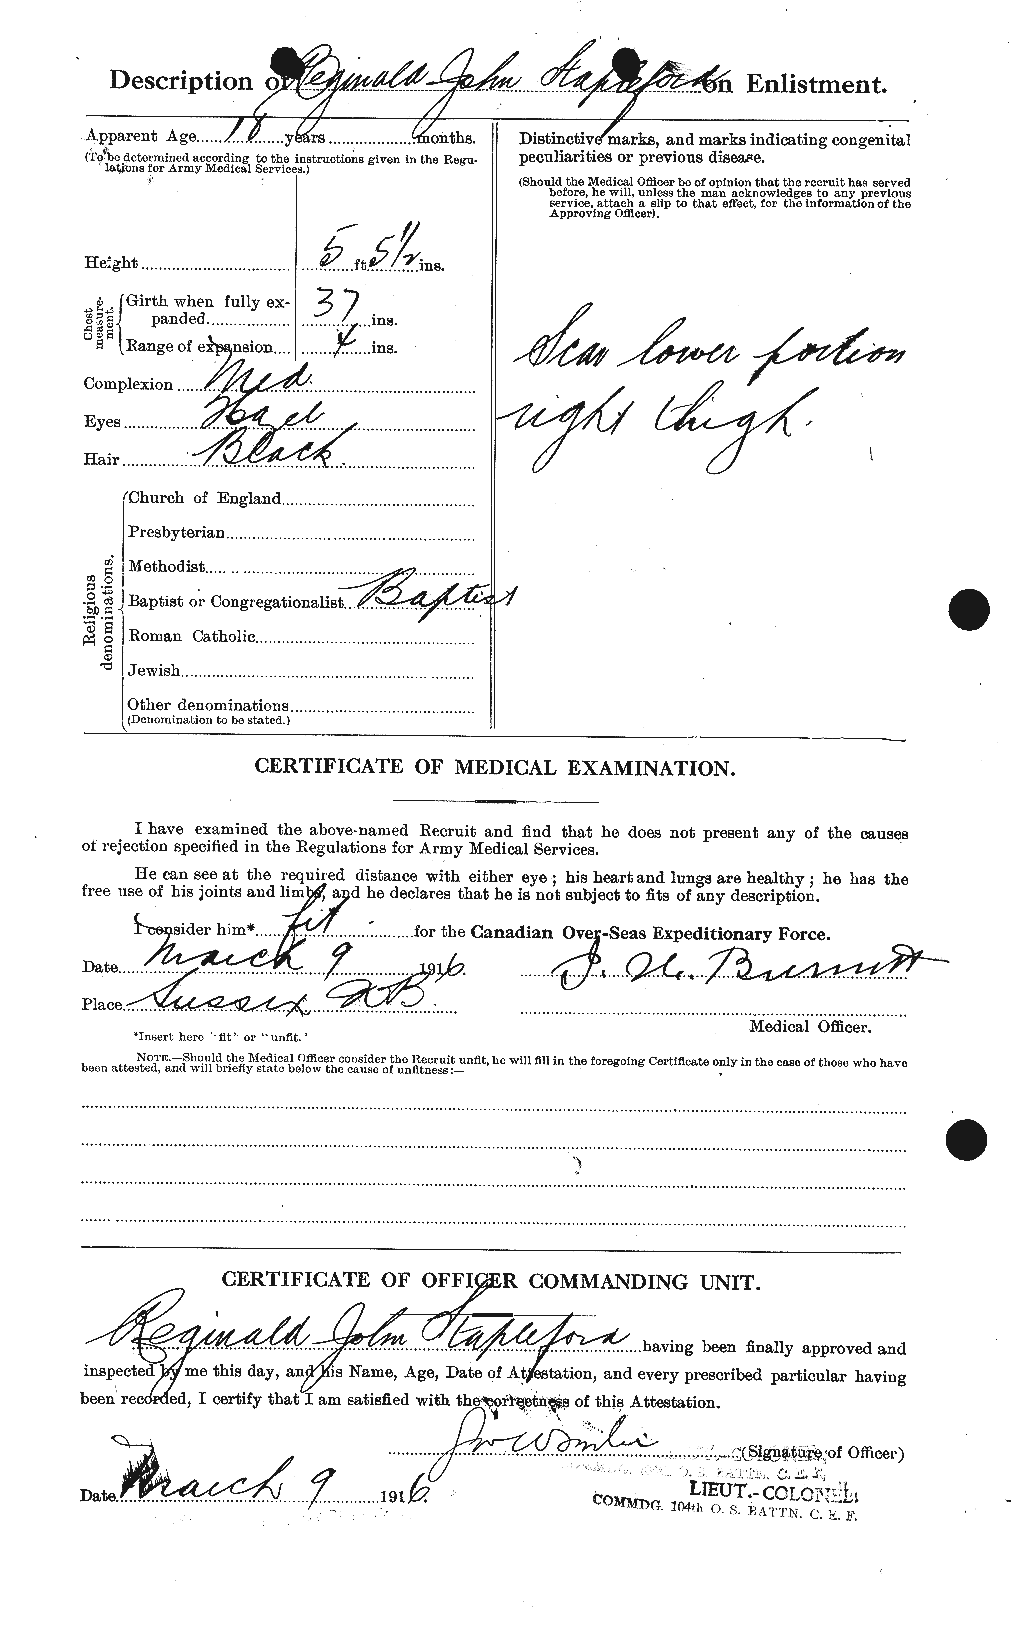 Personnel Records of the First World War - CEF 114266b